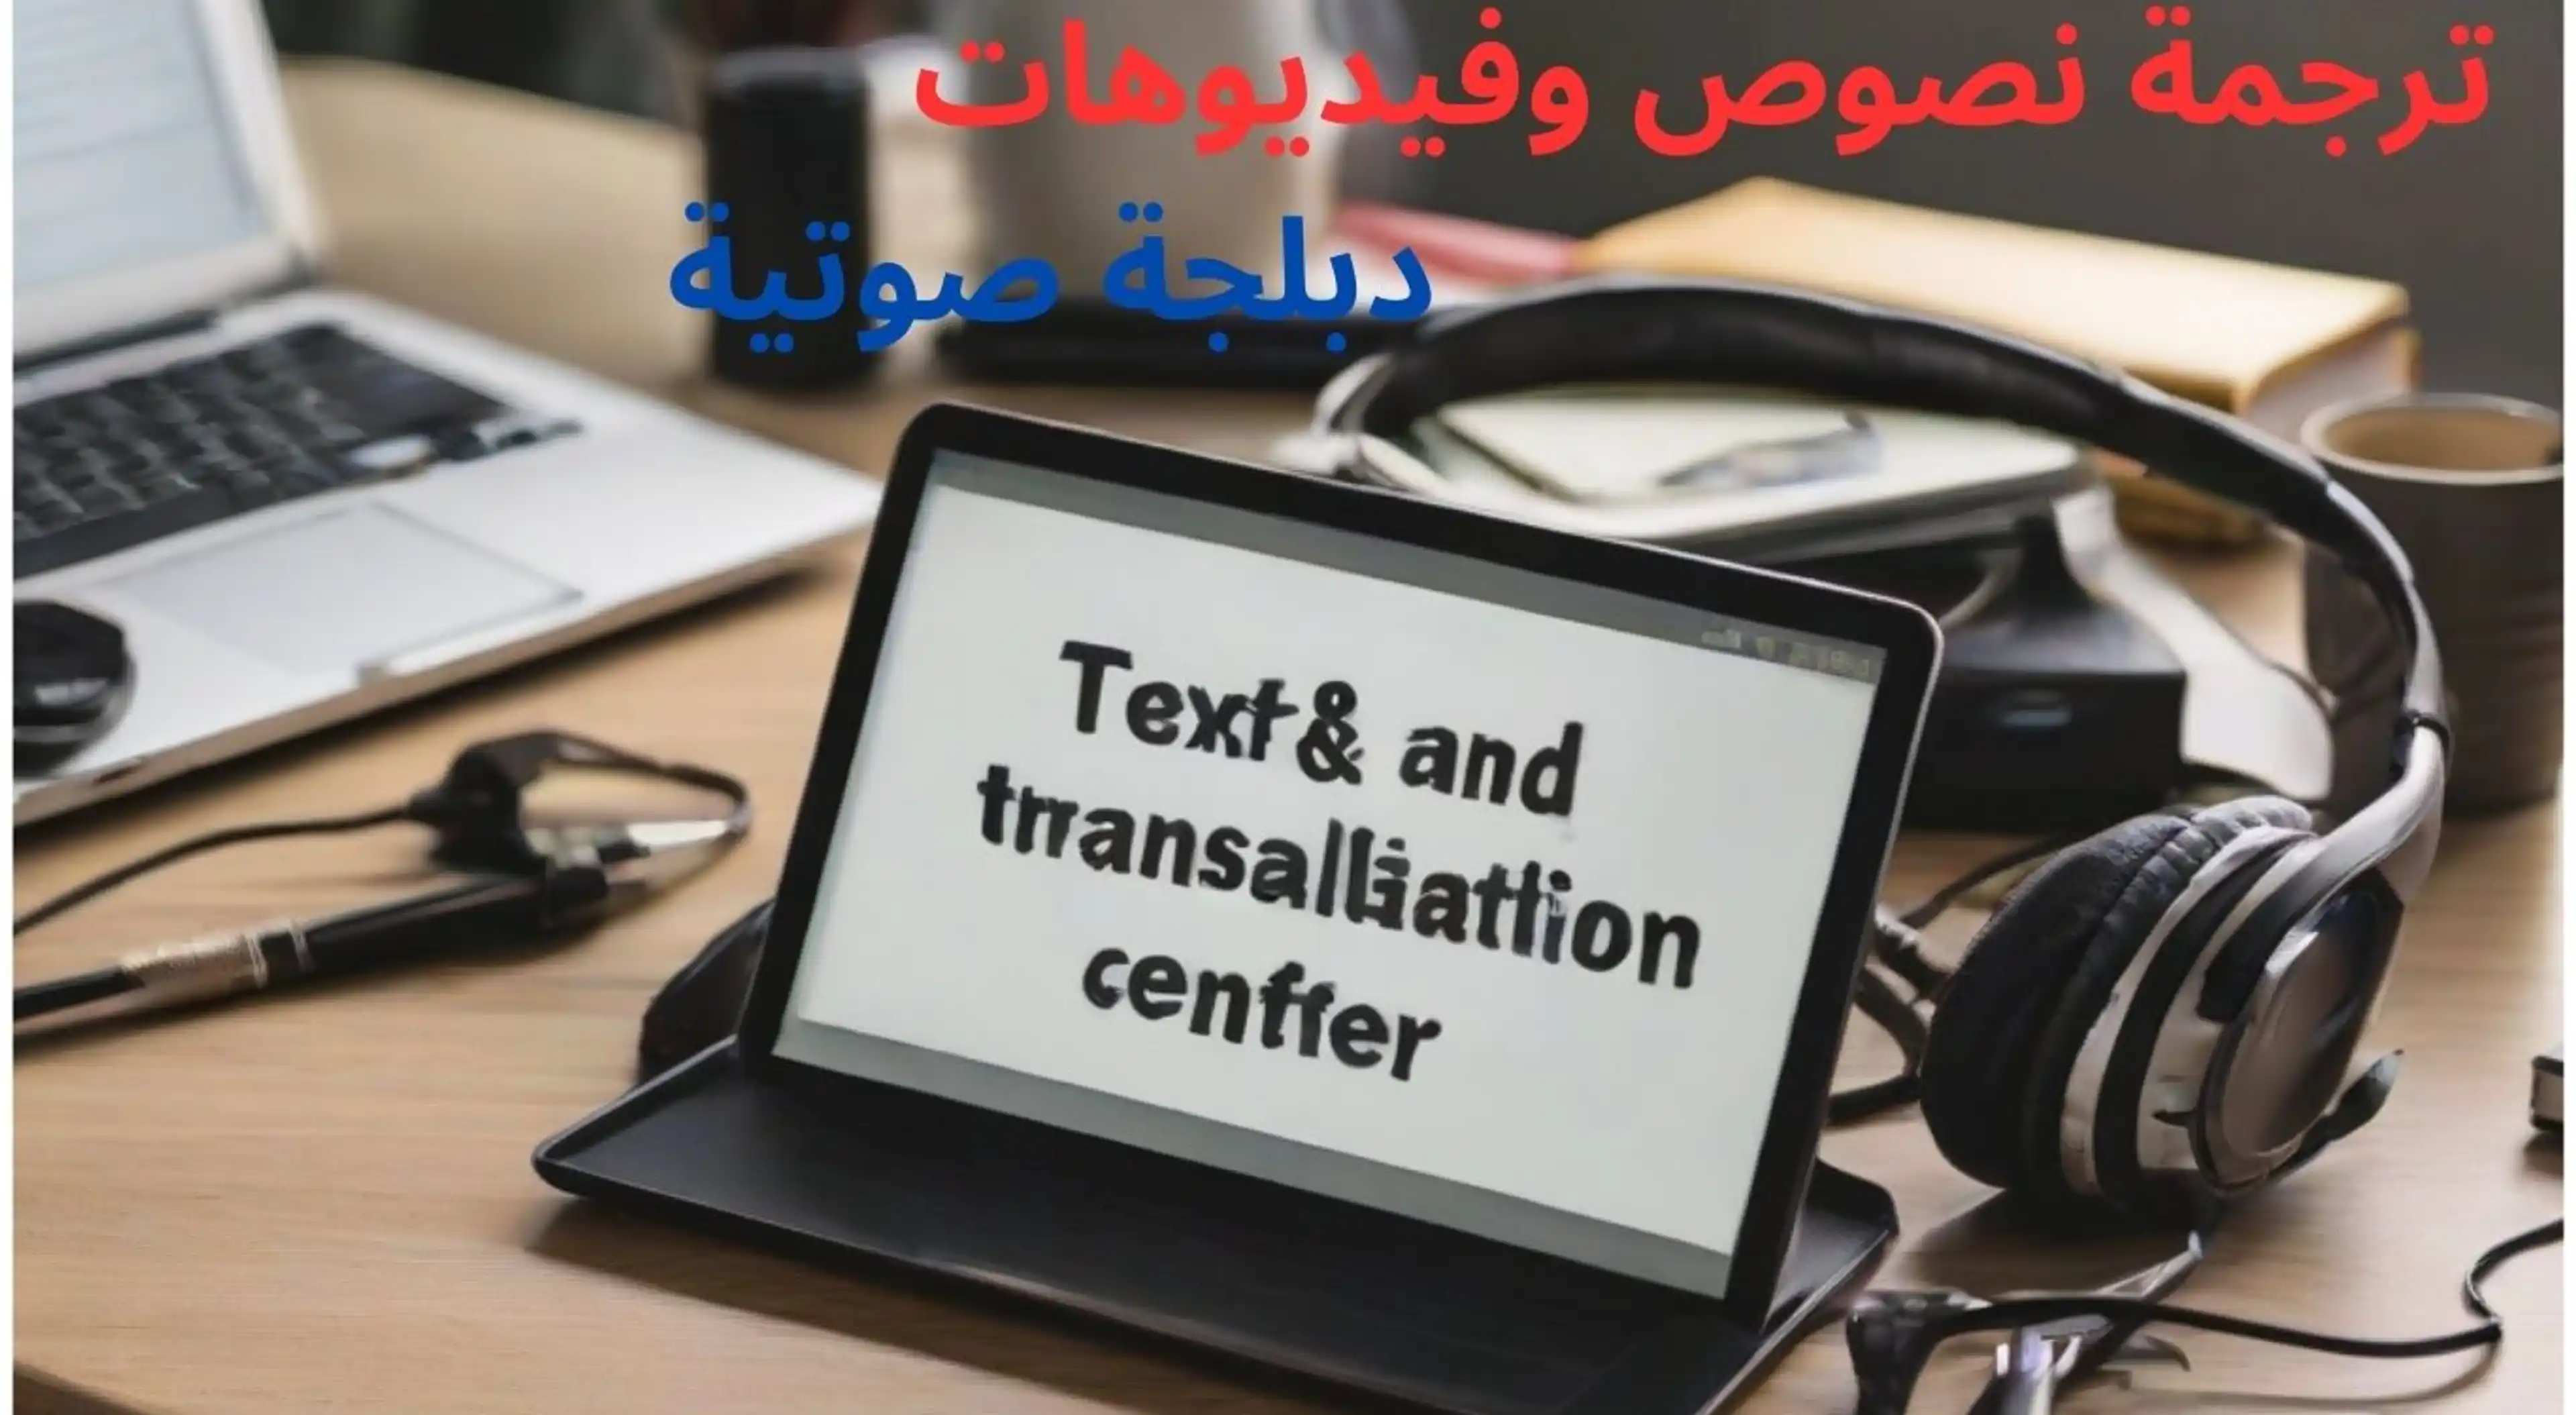 Translation of texts and videos